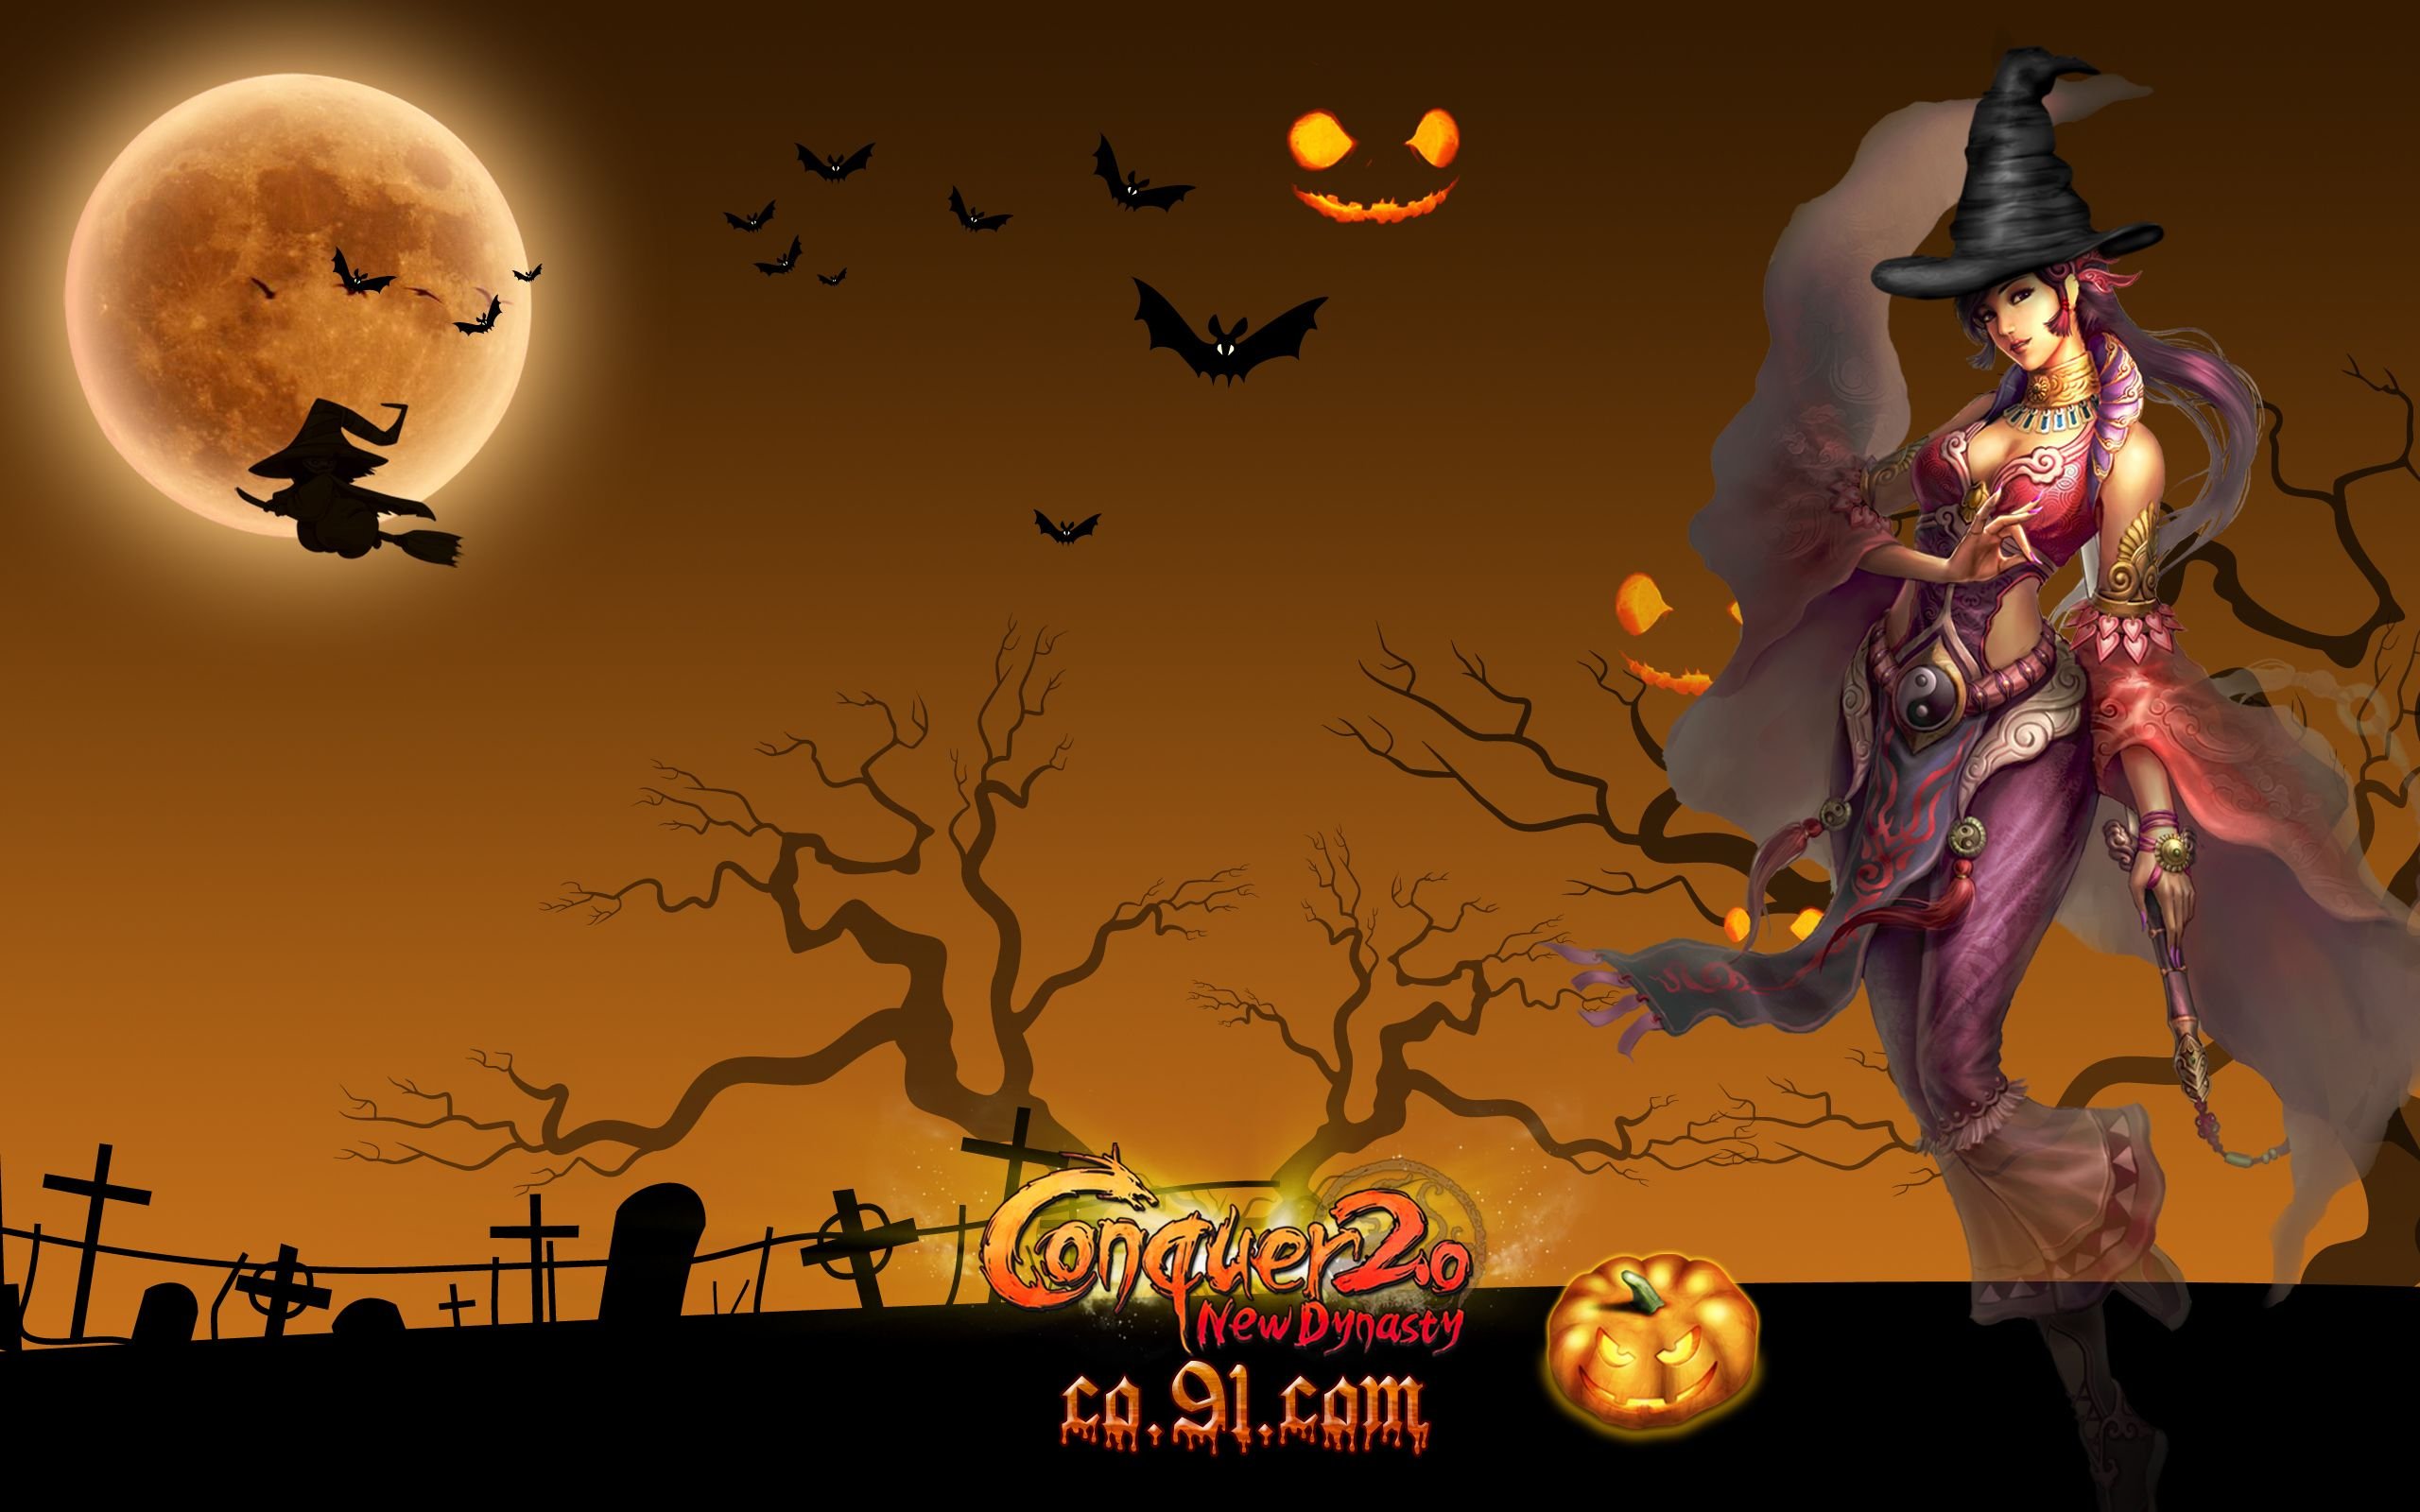 conquer, Online, Fantasy, Mmo, Rpg, Martial, Action, Fighting, 1cono, Warrior, Poster, Halloween, Witch Wallpaper